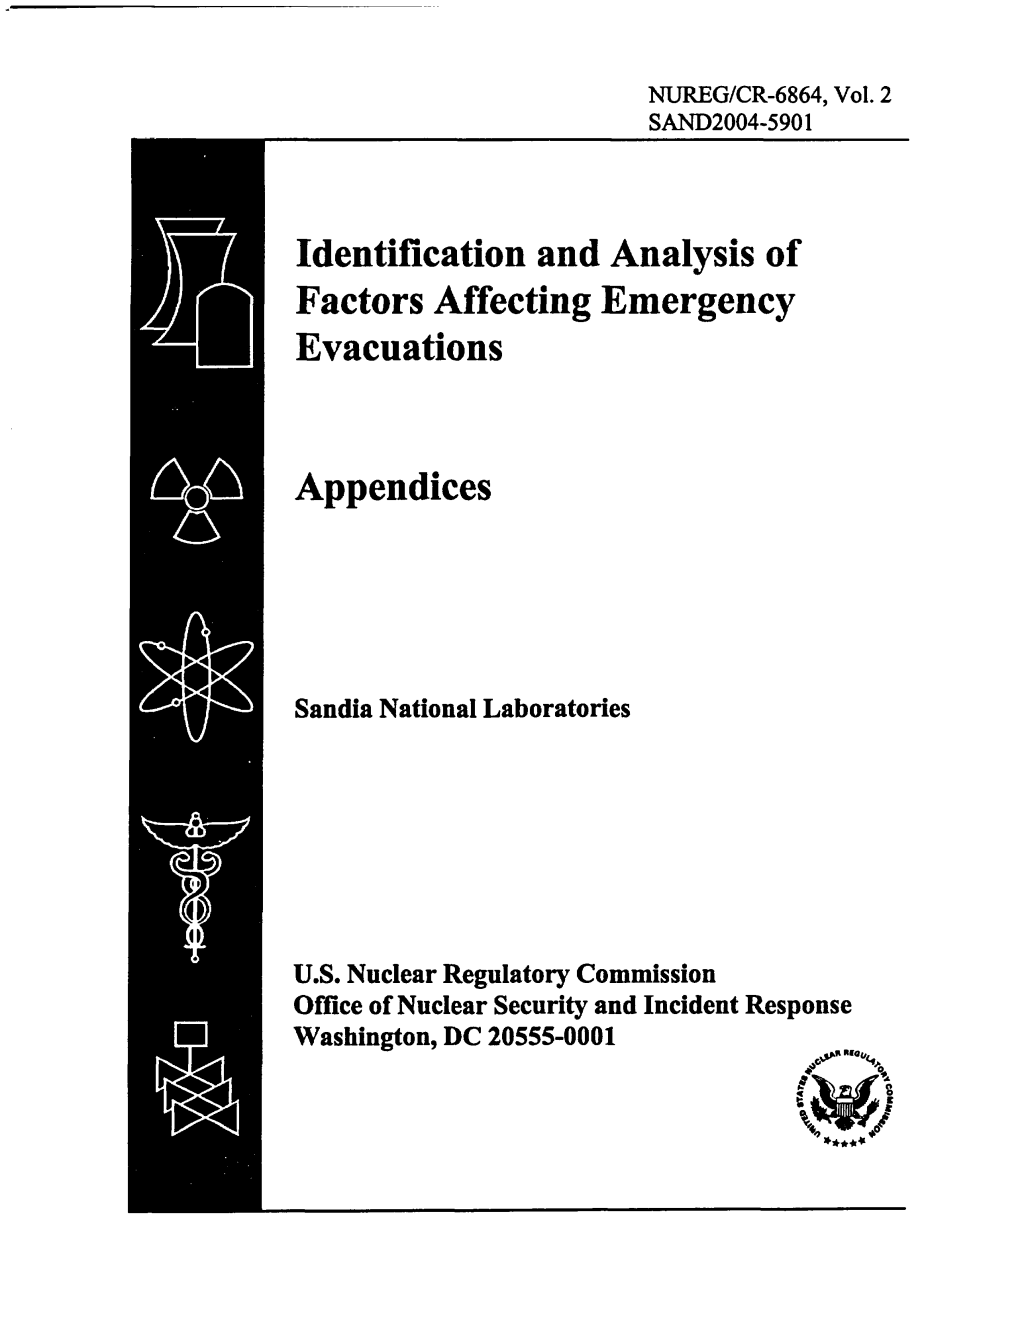 Identification and Analysis of Factors Affecting Emergency Evacuations